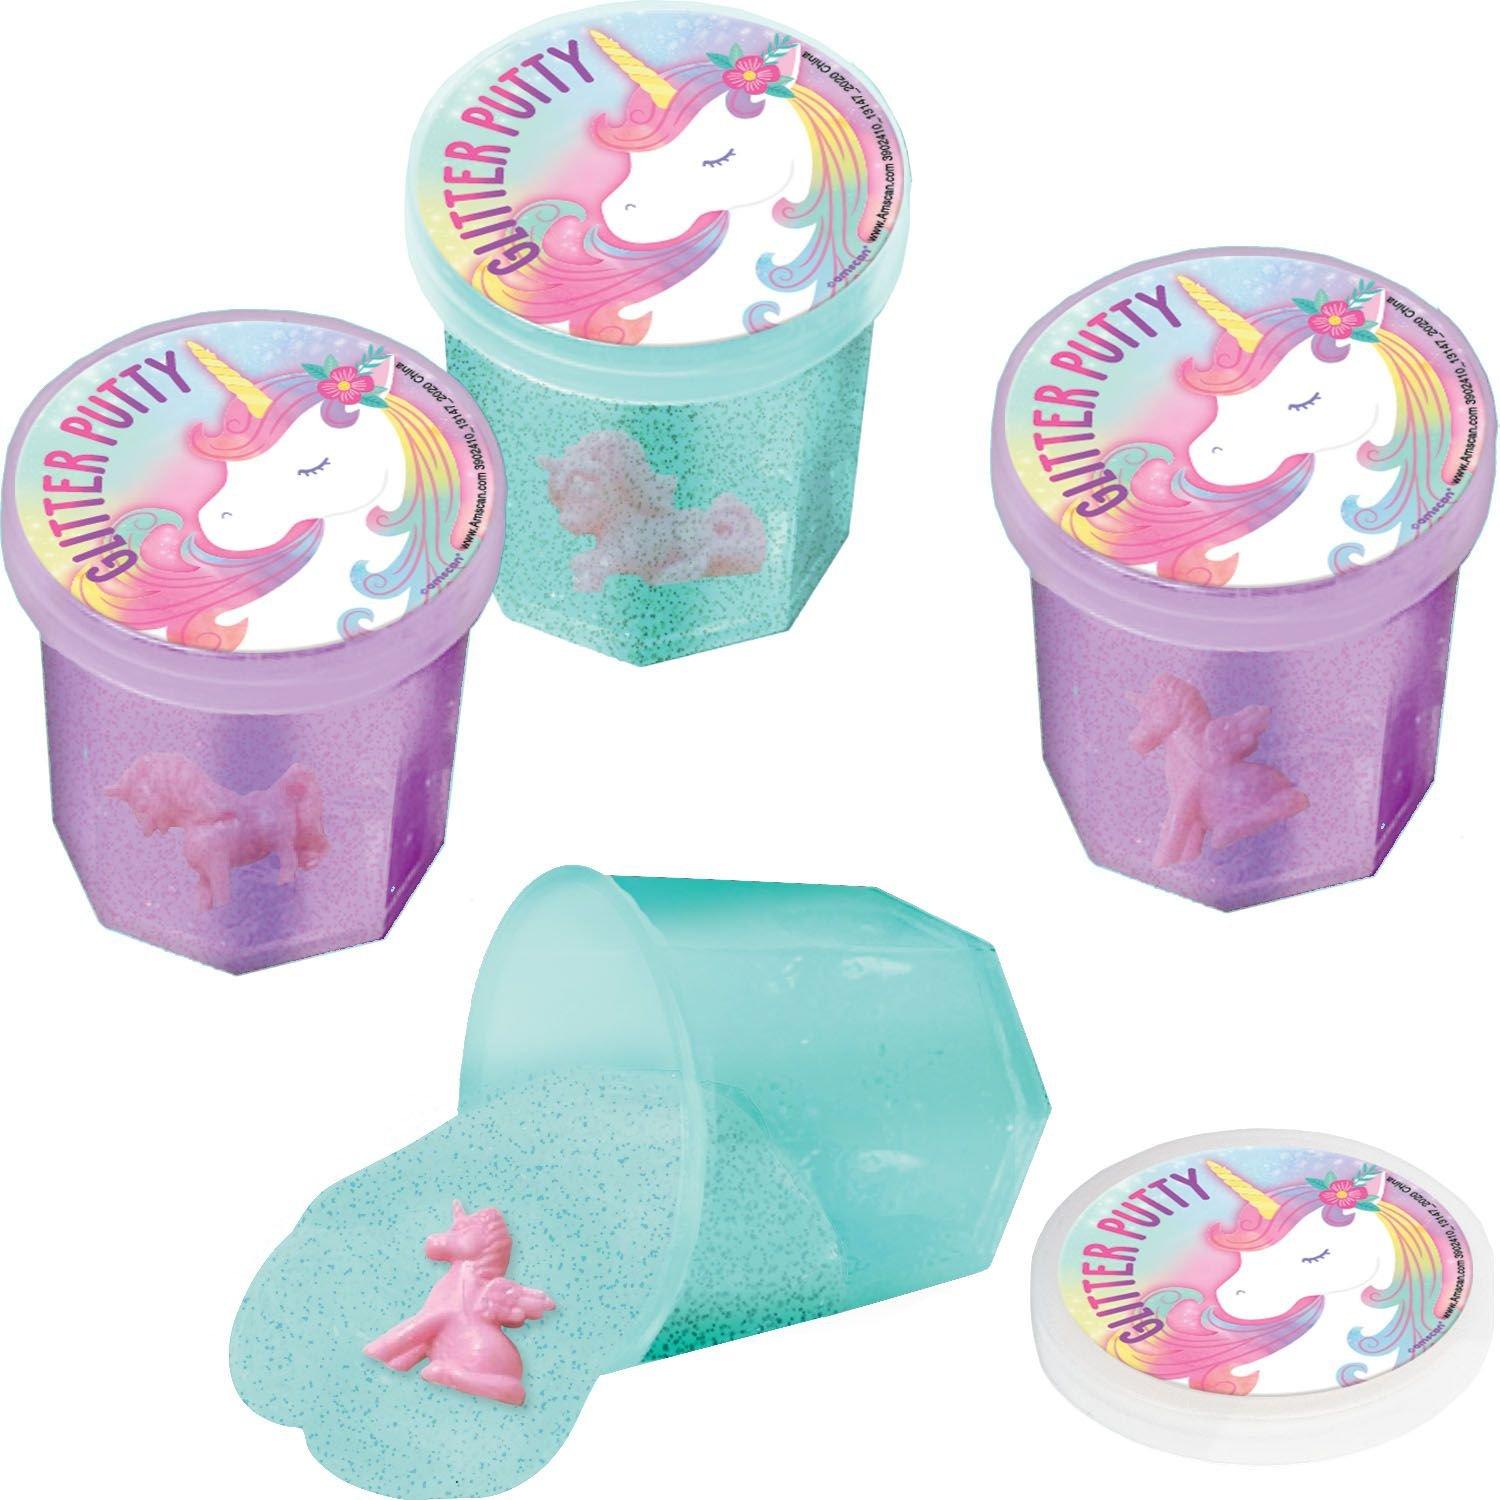 Brutal Great Barrier Reef Skynd dig Glitter Unicorn Putty with Toy 12ct | Party City